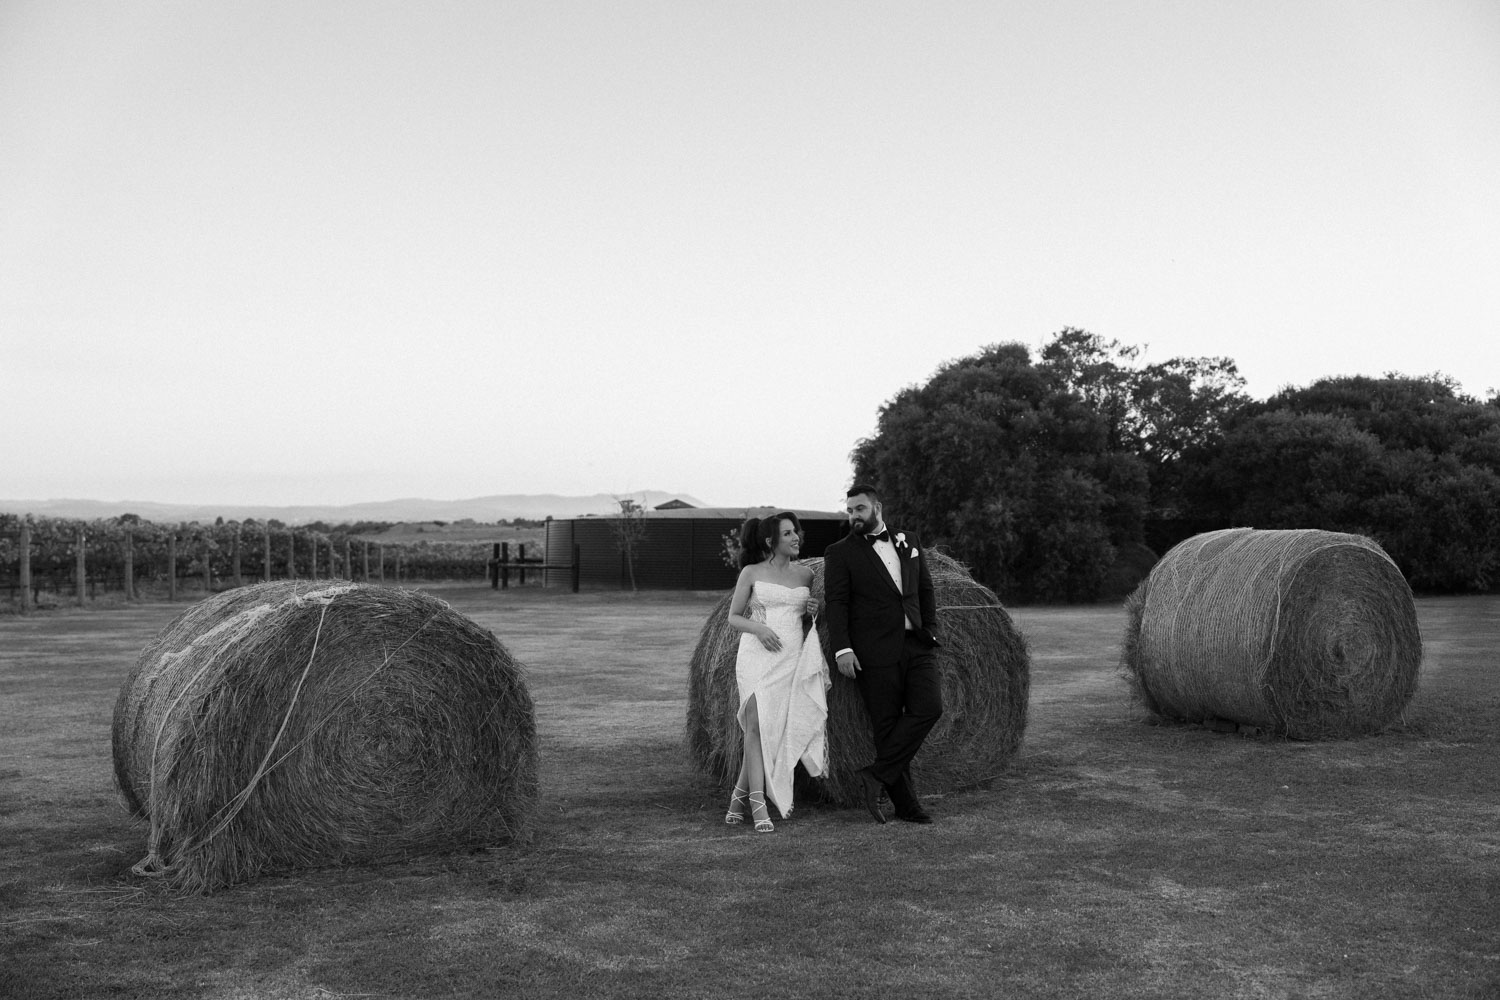 A Melbourne wedding photographer captures a timeless black and white image of a newlywed couple walking hand in hand beside large hay bales in a rustic field, symbolizing the start of their journey together, with the tranquil expanse of the Australian countryside stretching out around them.